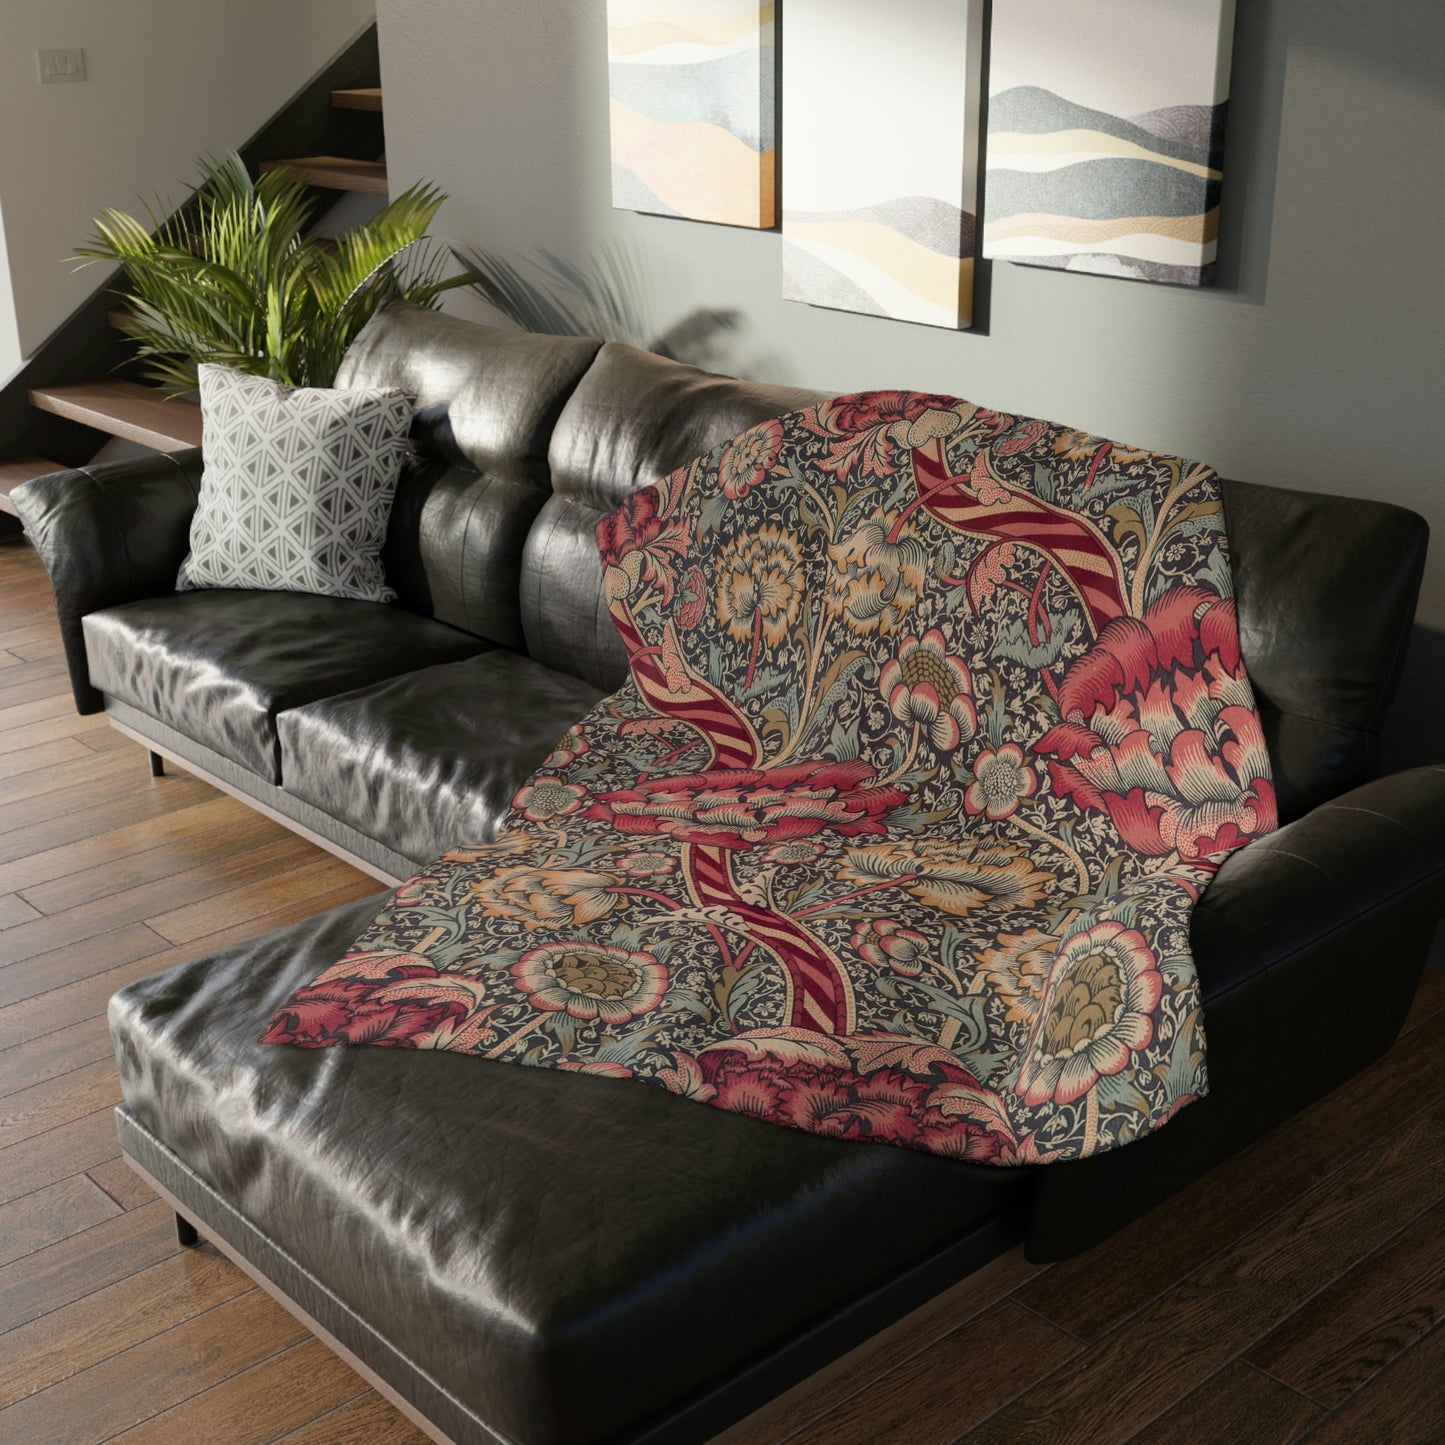 william-morris-co-luxury-velveteen-minky-blanket-two-sided-print-wandle-collection-5